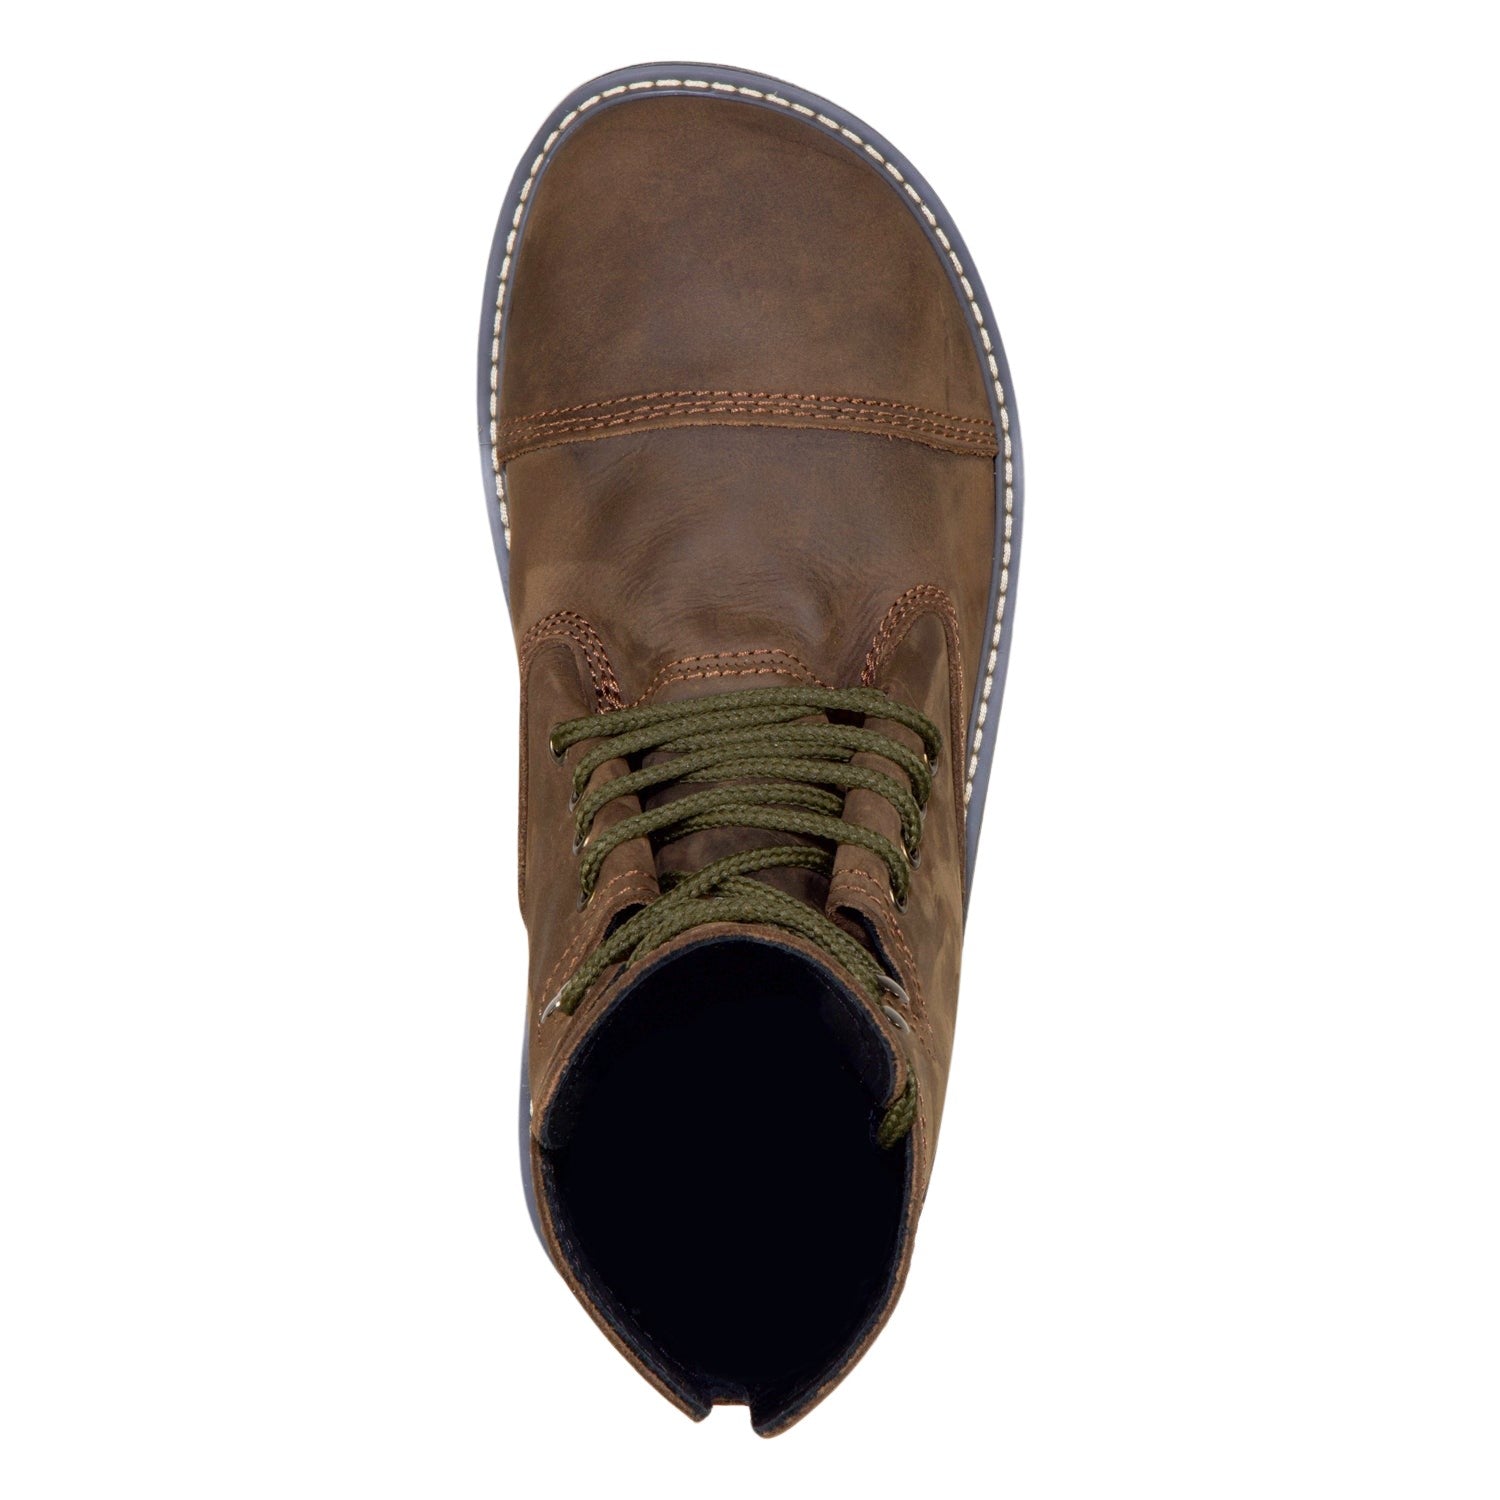 Top view of a Bruin boot in Kodiak Brown by Bearfoot, with green laces, featuring visible stitching and a wide toe-box design.